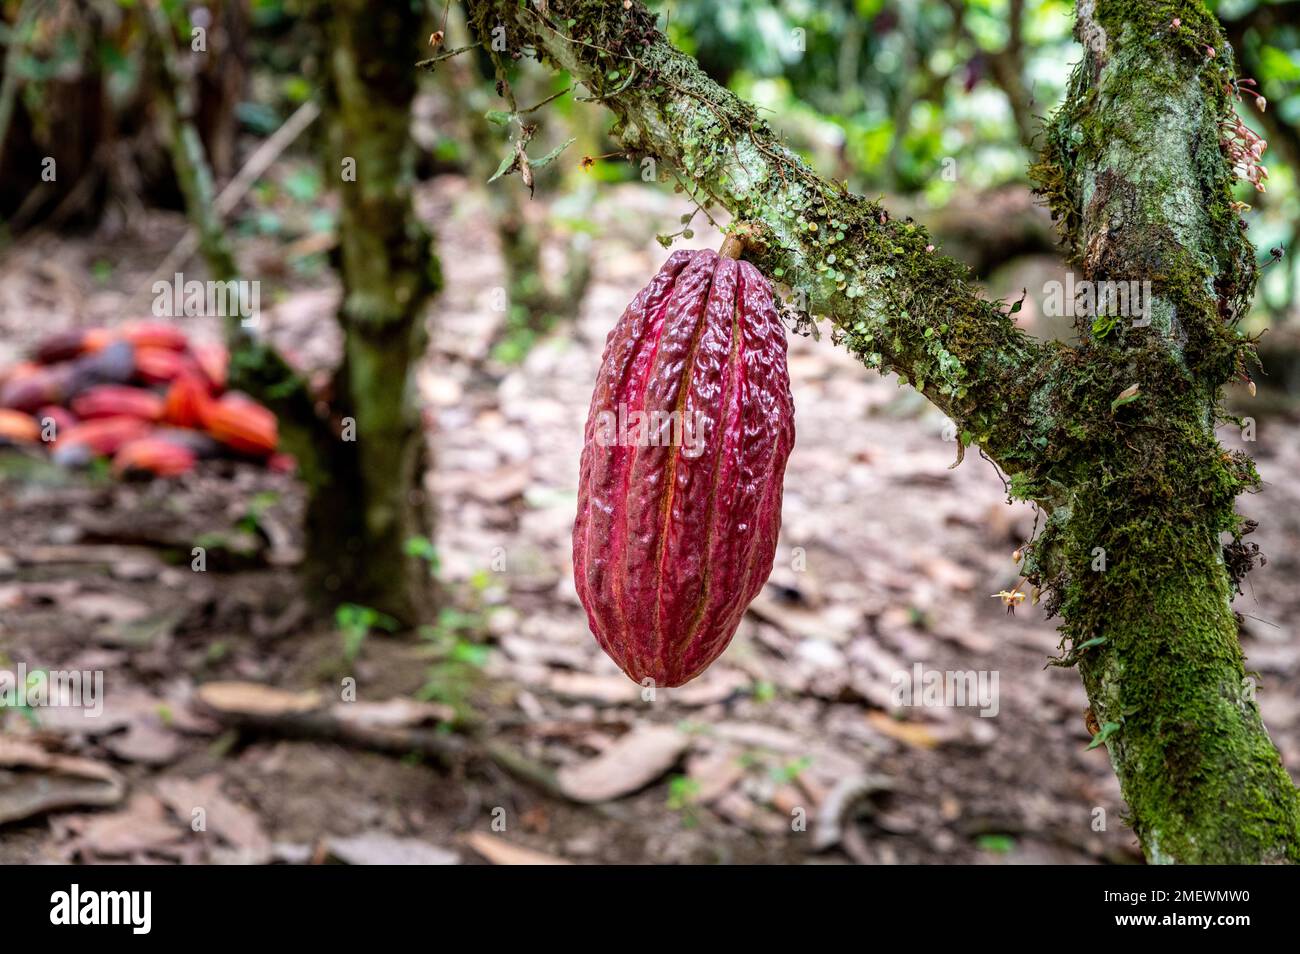 Close up view of colorful raw cacao bean hanging from the tree in a cacao plantation in Ecuador. Stock Photo